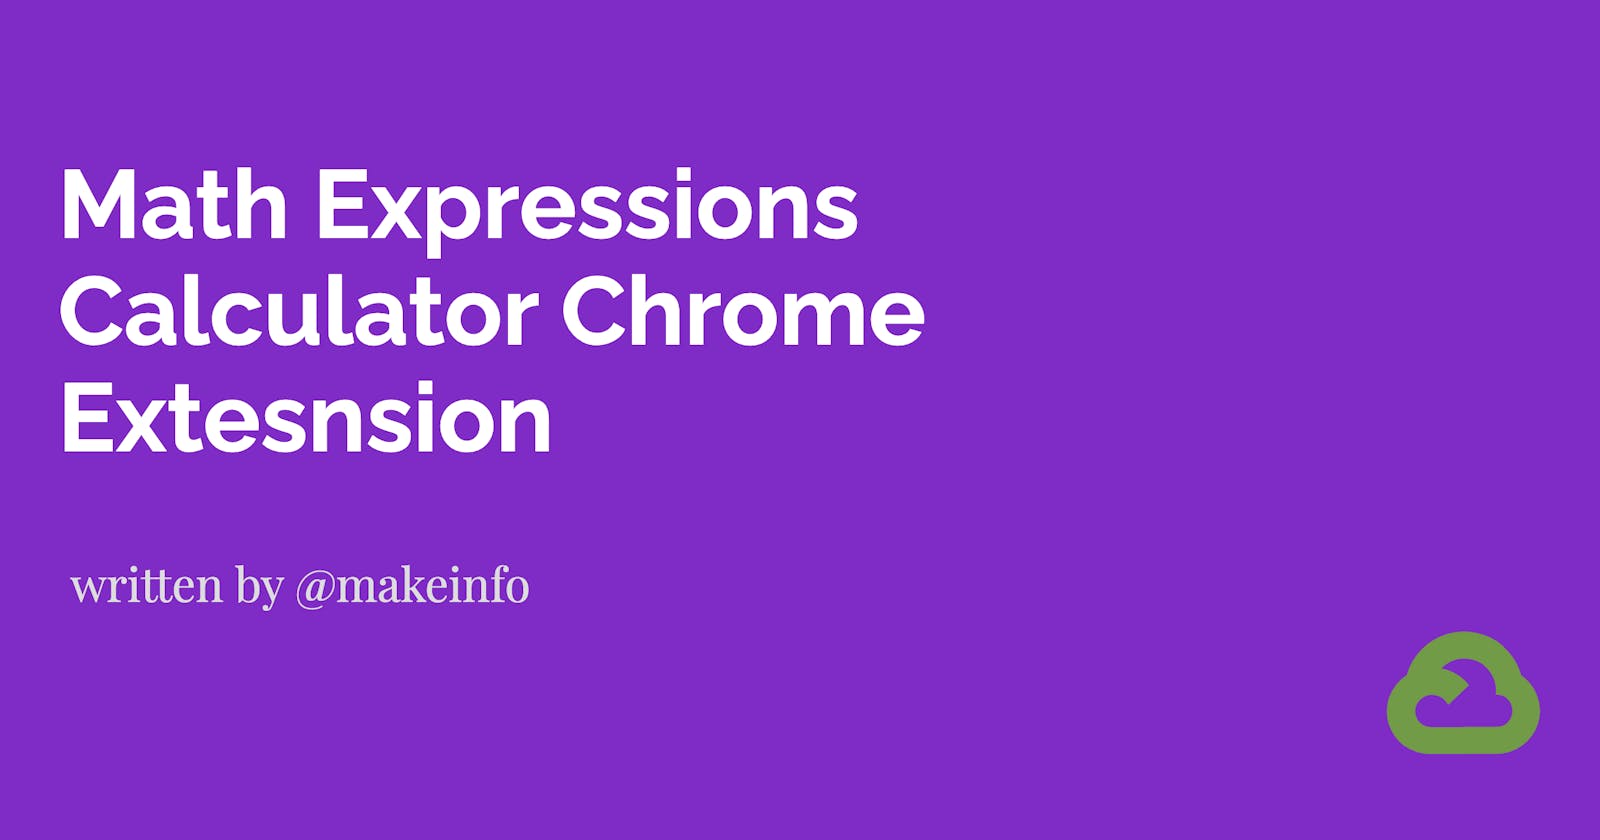 Math Expressions Calculator Chrome Extesnsion